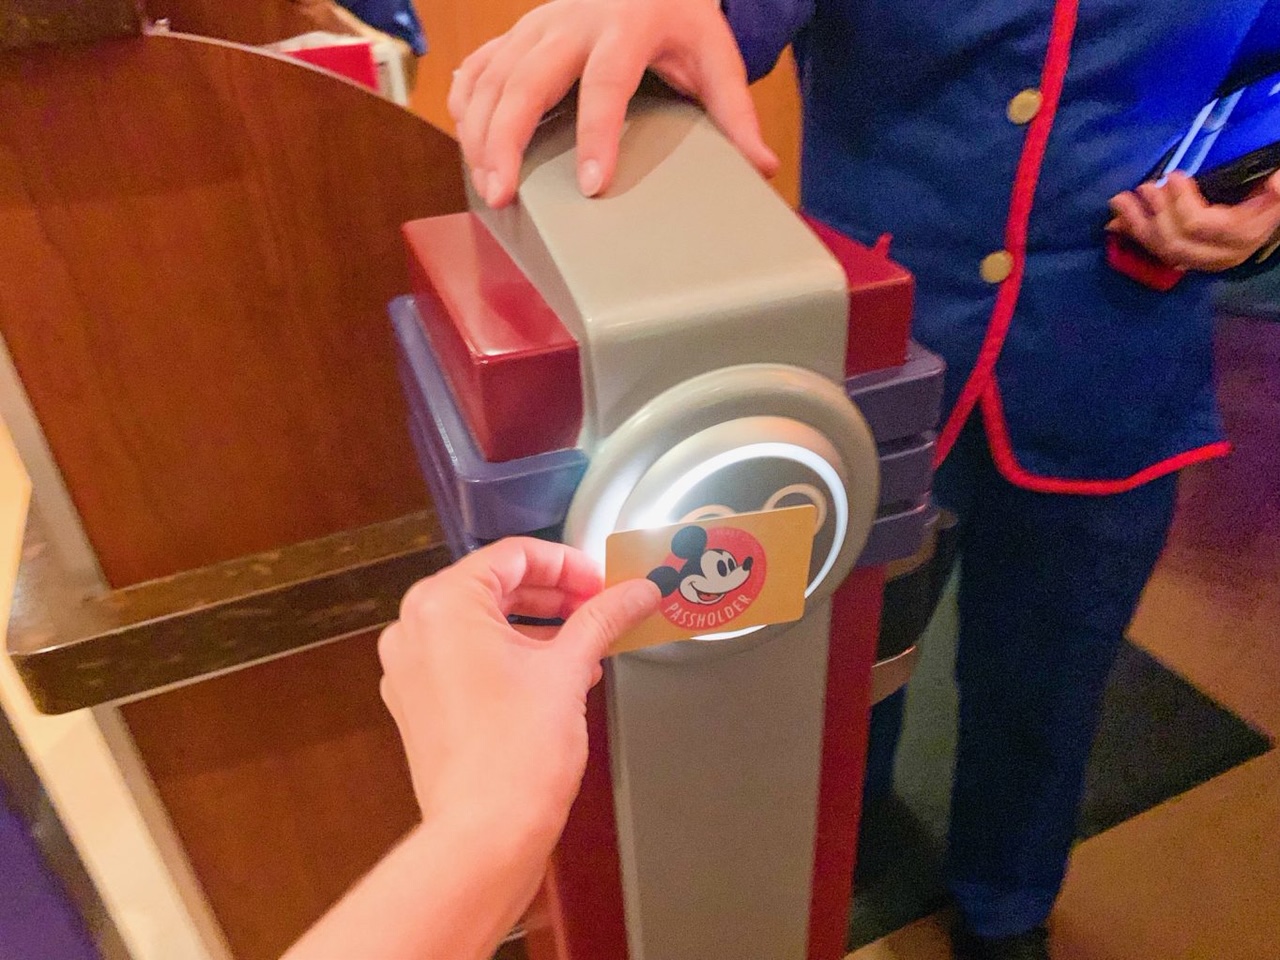 guest scanning their park ticket at the fastpass scanner